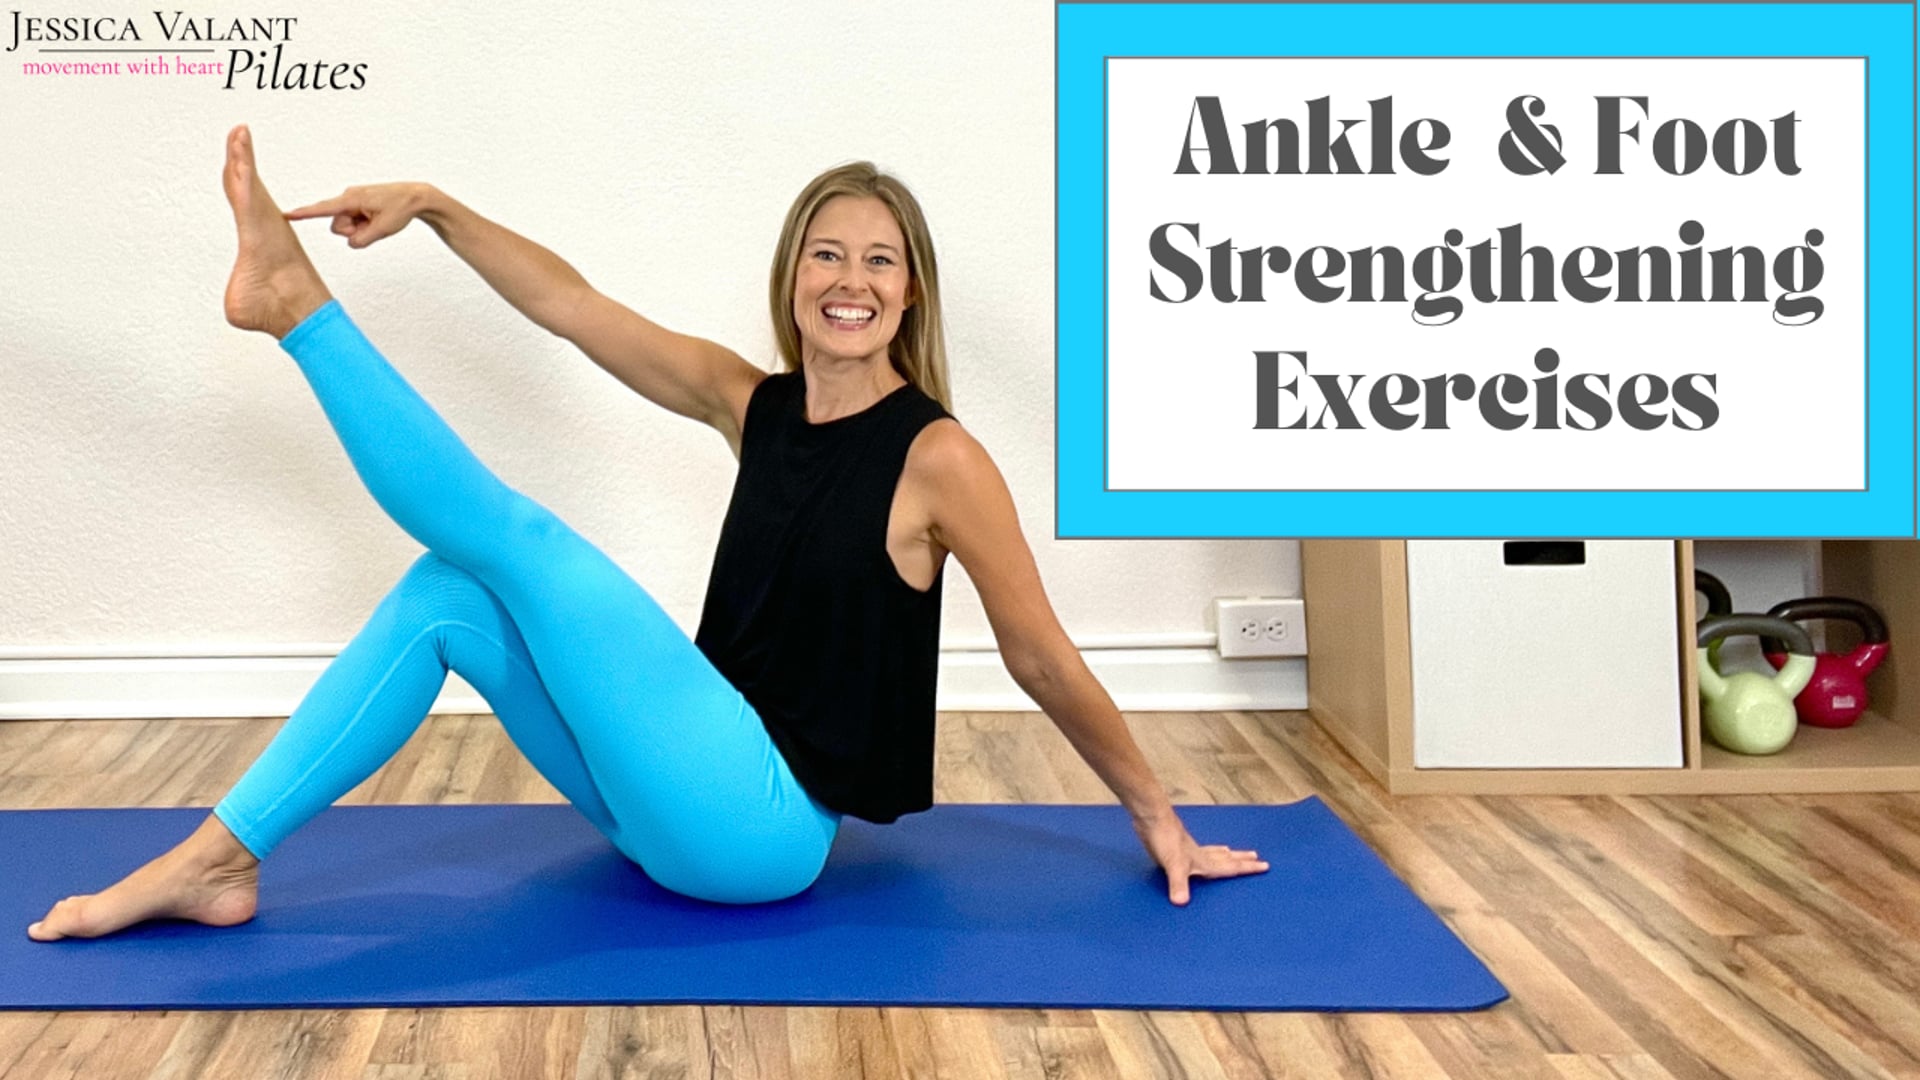 Ankle And Foot Strengthening Exercises Jessica Valant Pilates